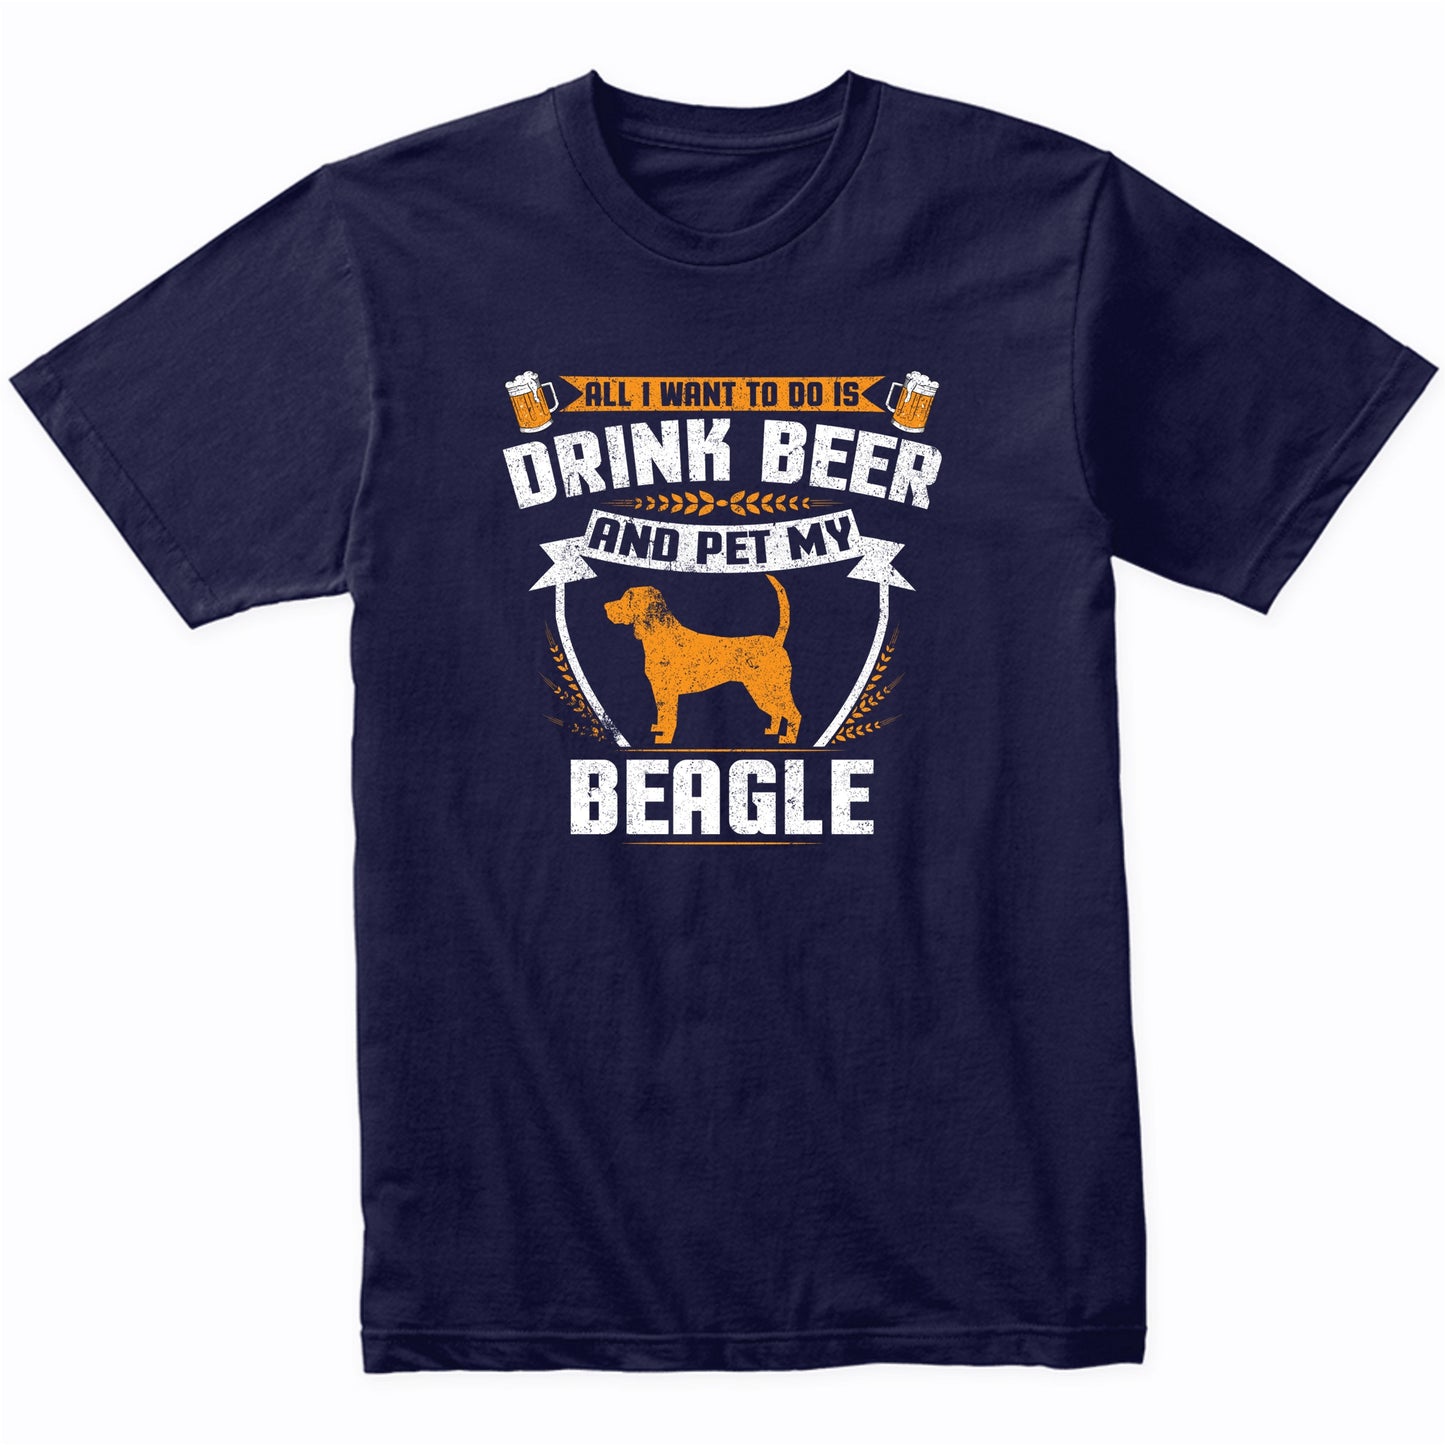 All I Want To Do Is Drink Beer And Pet My Beagle Funny Dog Owner Shirt